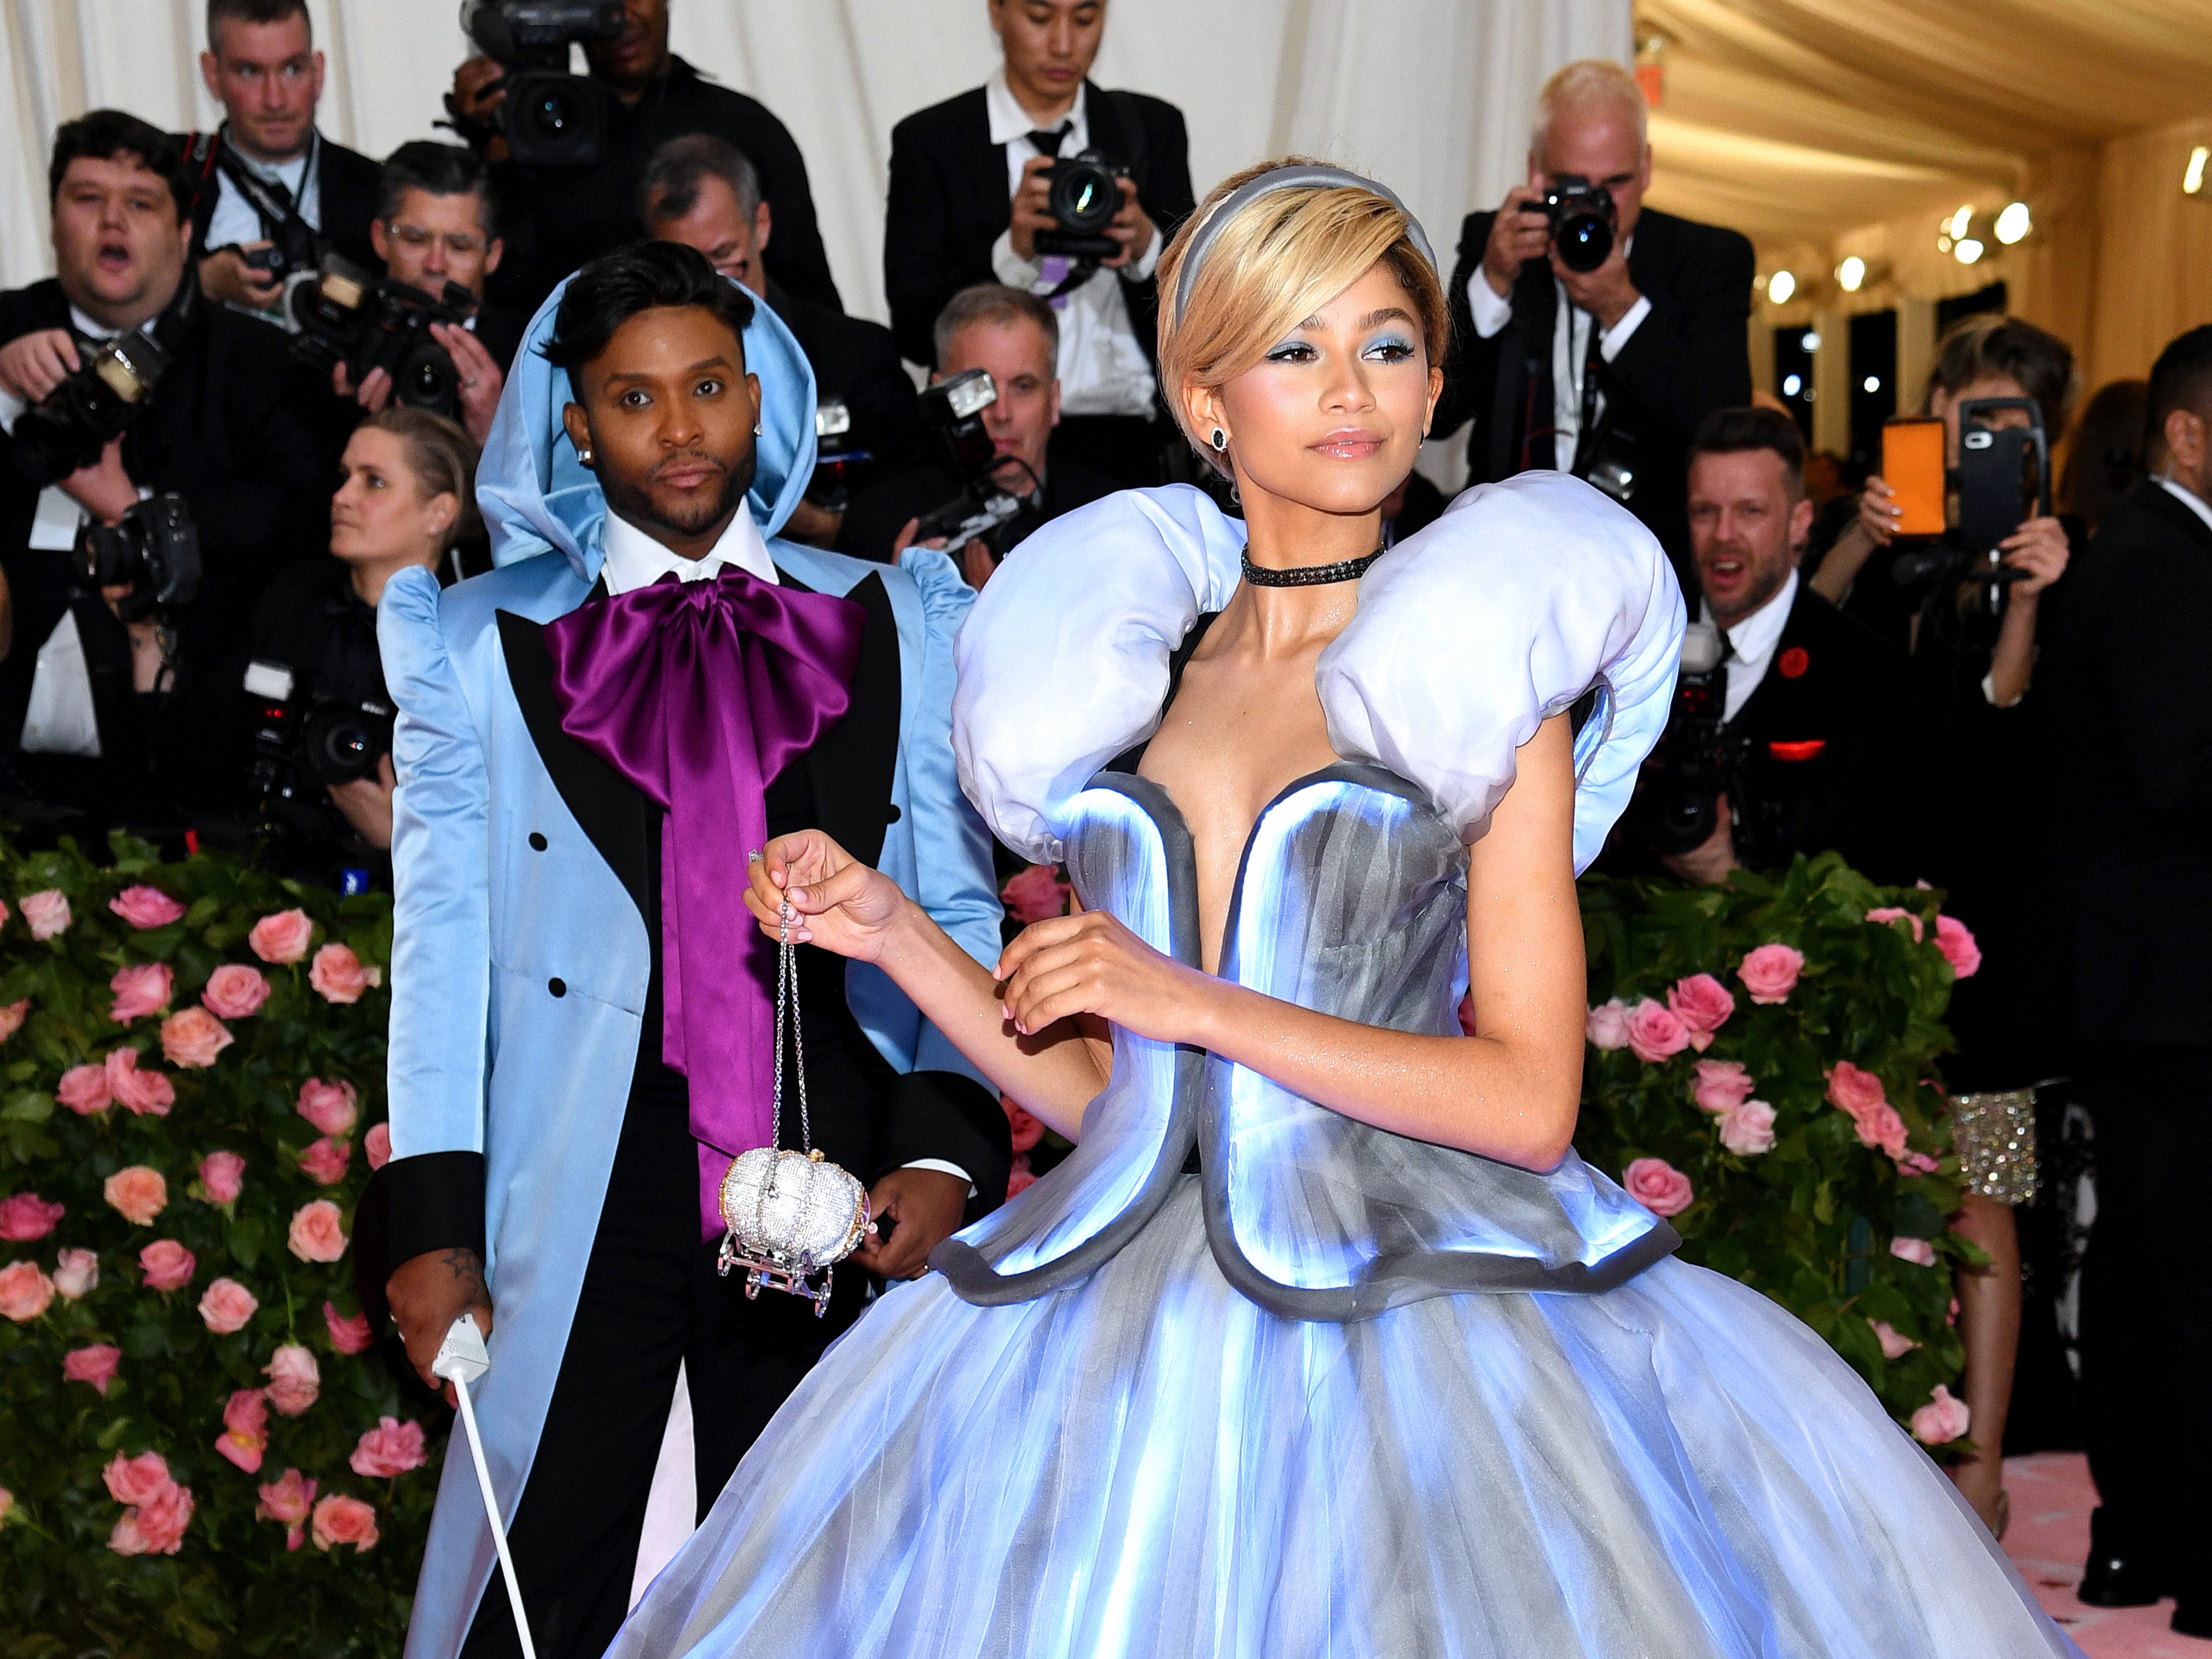 Law Roach and Zendaya attend The 2019 Met Gala in a Disney princess-style gown